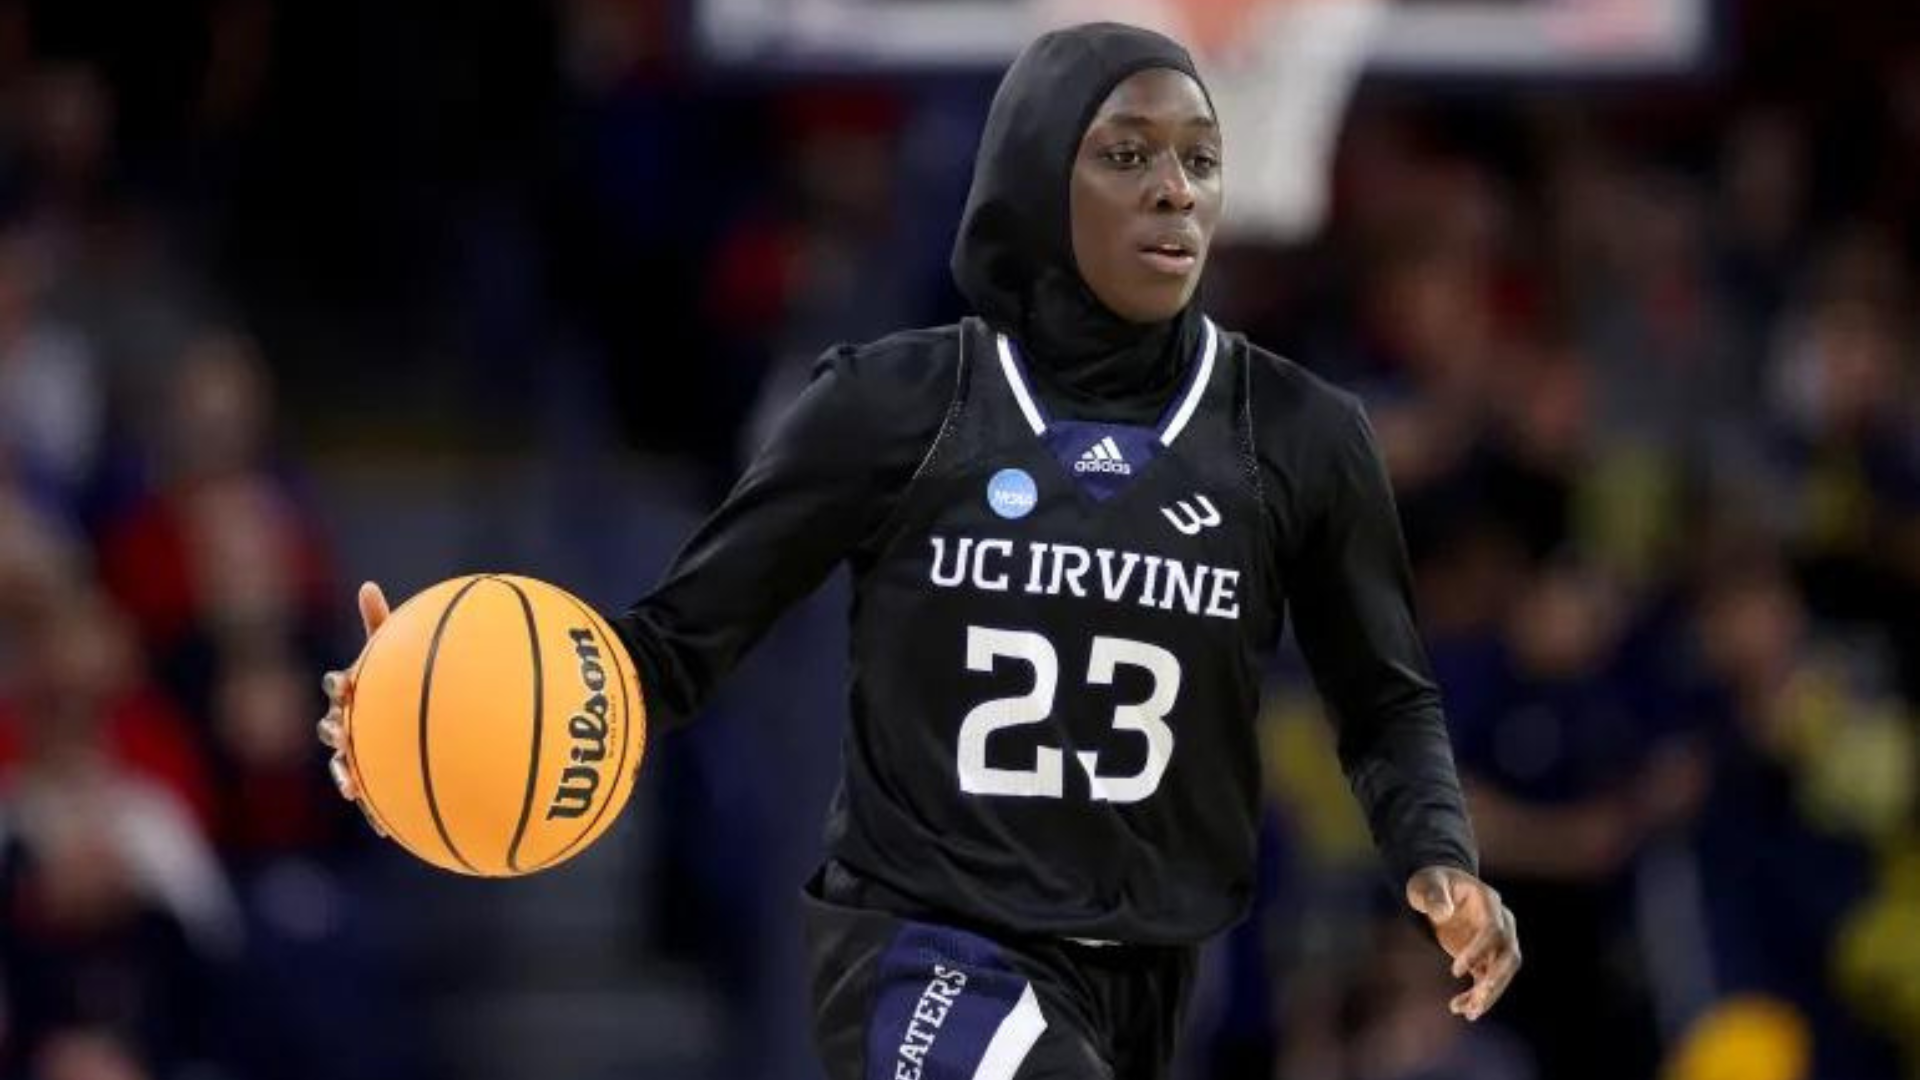 Basketball Players Urge French Authorities to Reconsider Hijab Ban Ahead of Olympics